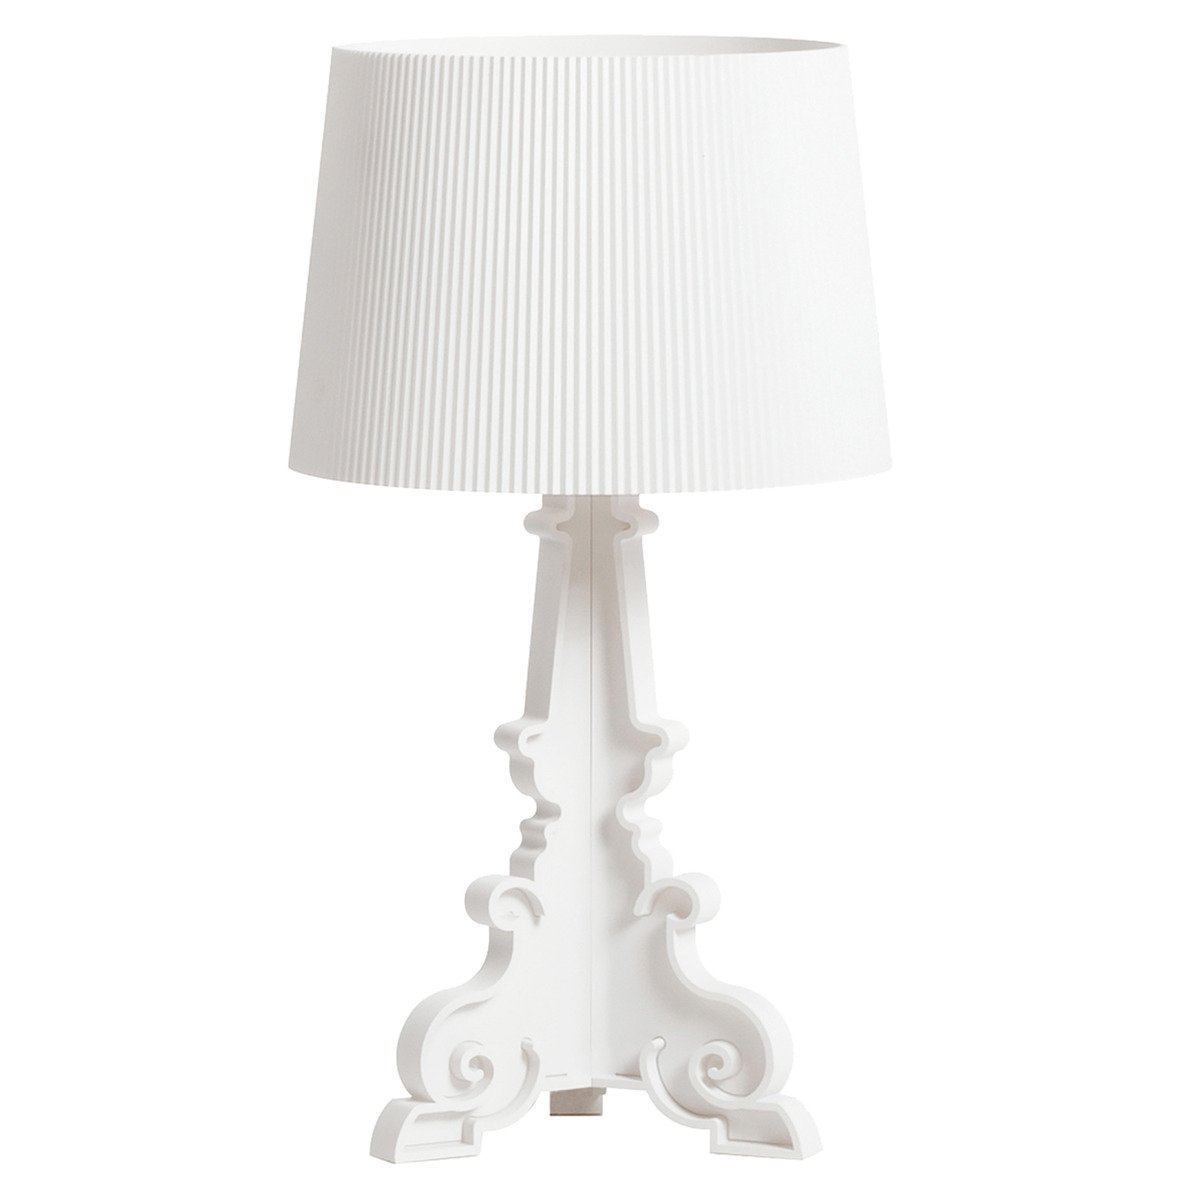 Kartell Bourgie Table Lamp Matt White, How To Use Table Lamp